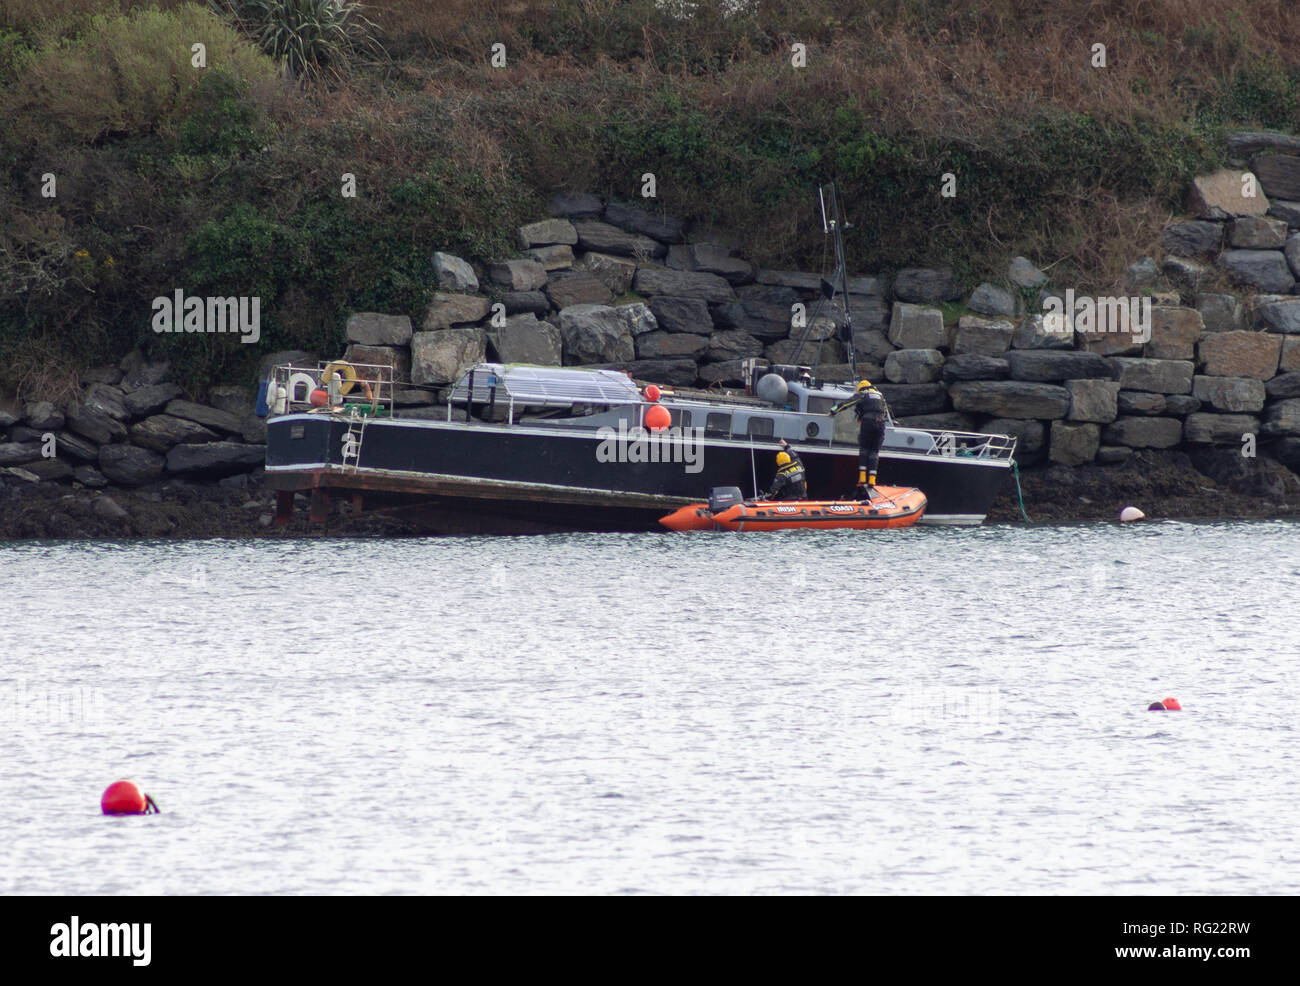 Last night’s high winds found the MV Sea Tracker aground on the rocks in Castlehaven Harbour this morning. The wooden hulled vessel was stuck fast on a falling tide, the Irish Coast Guard are in attendance and no casualties are reported. Credit: aphperspective/Alamy Live News Stock Photo